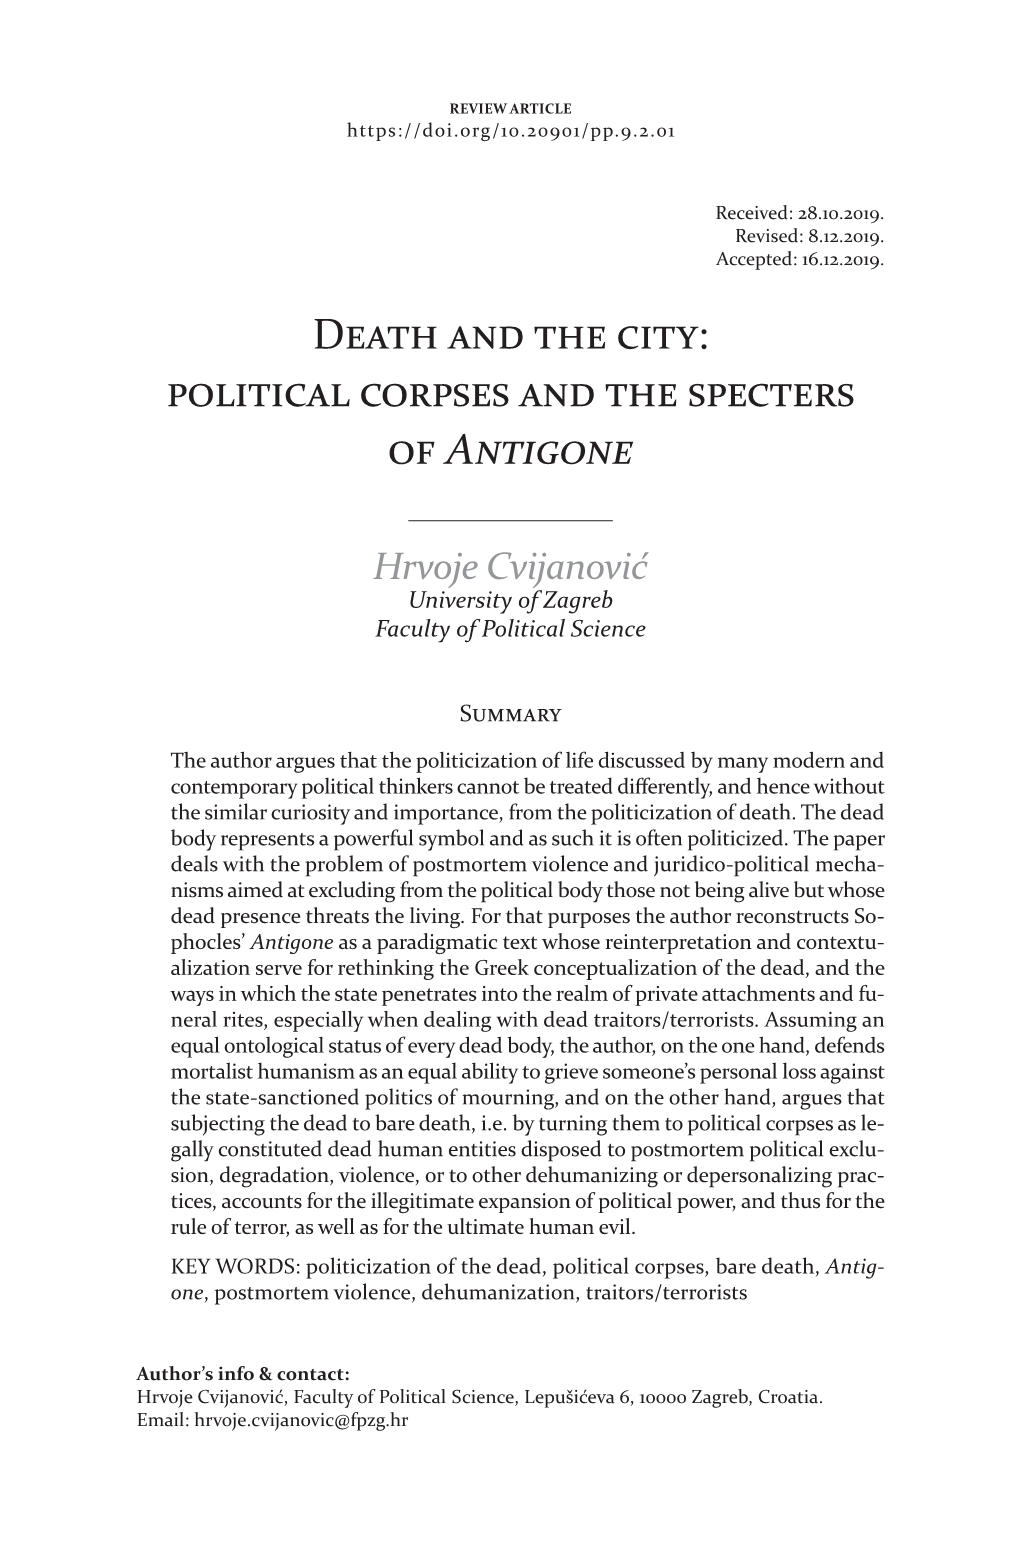 Death and the City: Political Corpses and the Specters of Antigone